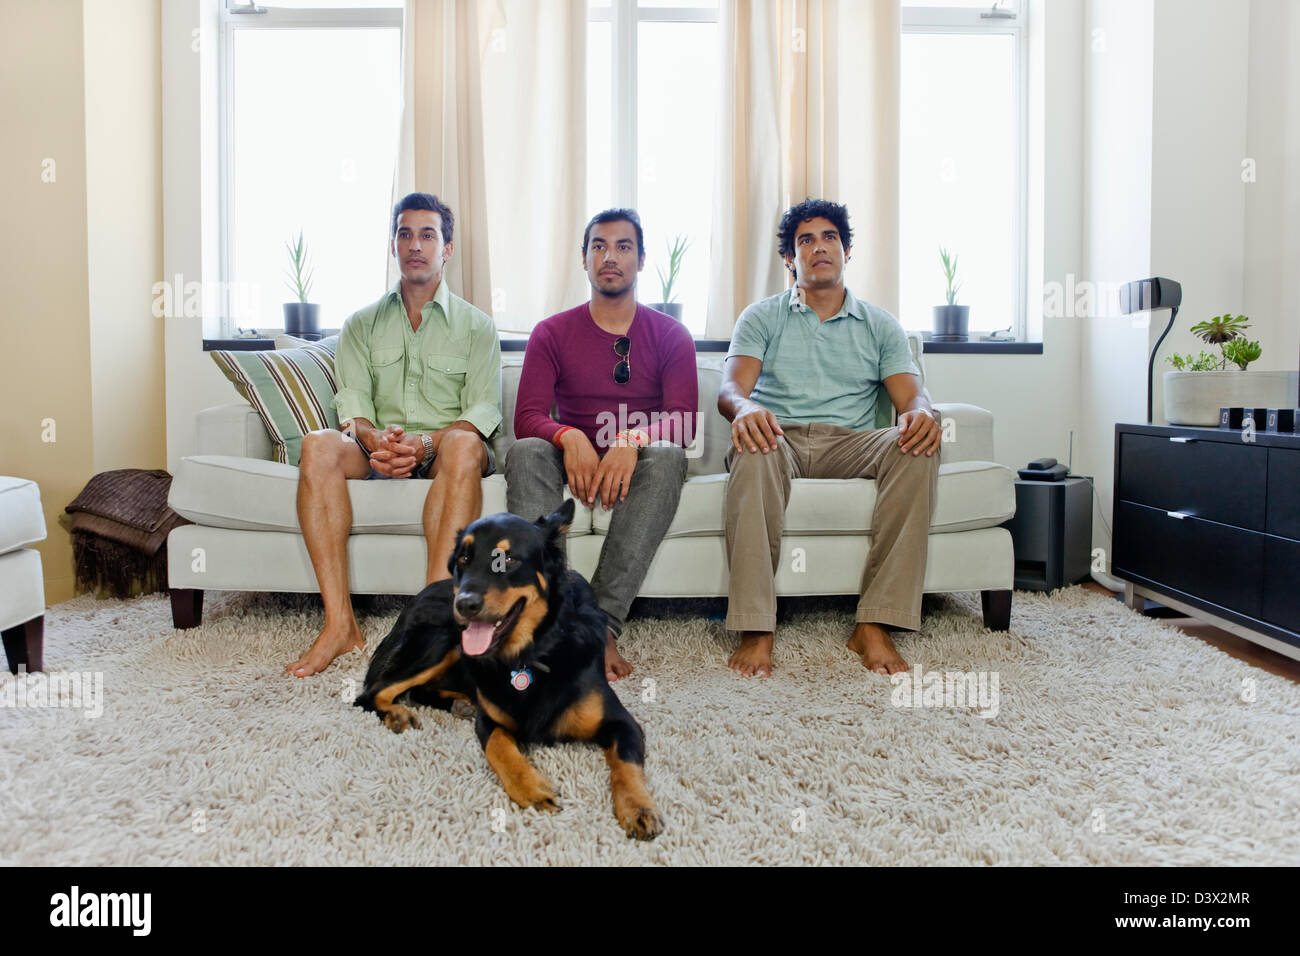 Young Hispanic-American Men, Sitting in Living Room Waiting, Bored Stock Photo